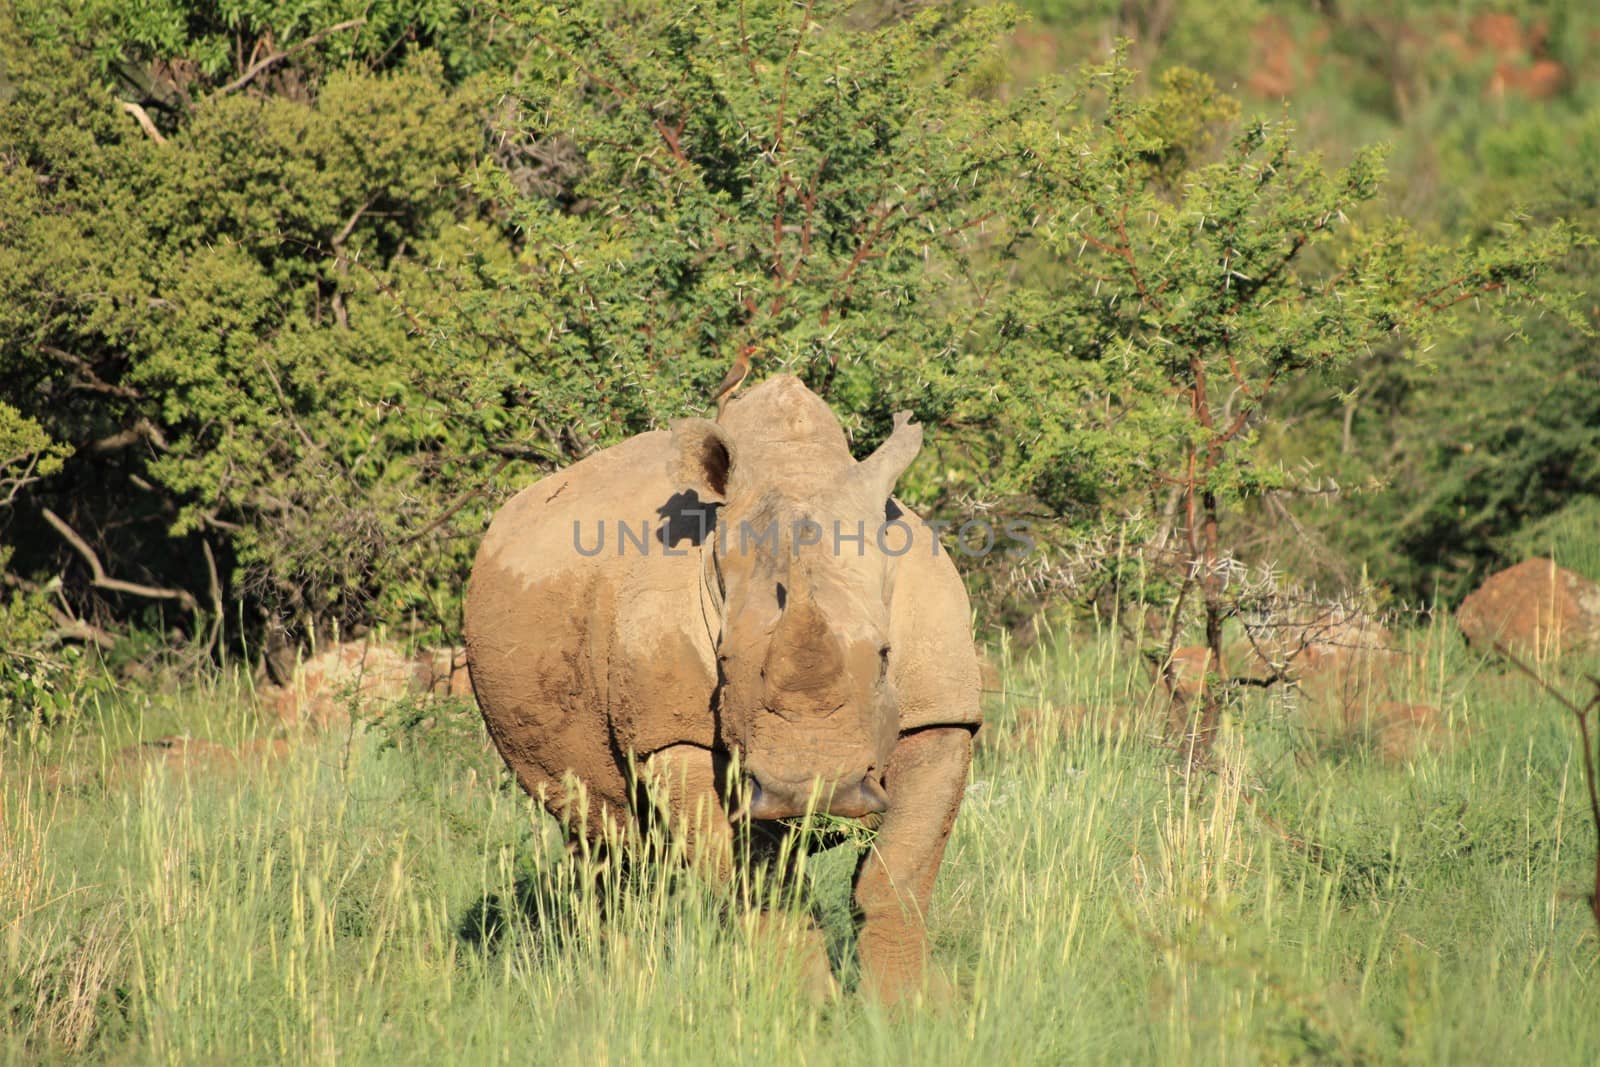 A white rhino in the african bush in front of some trees